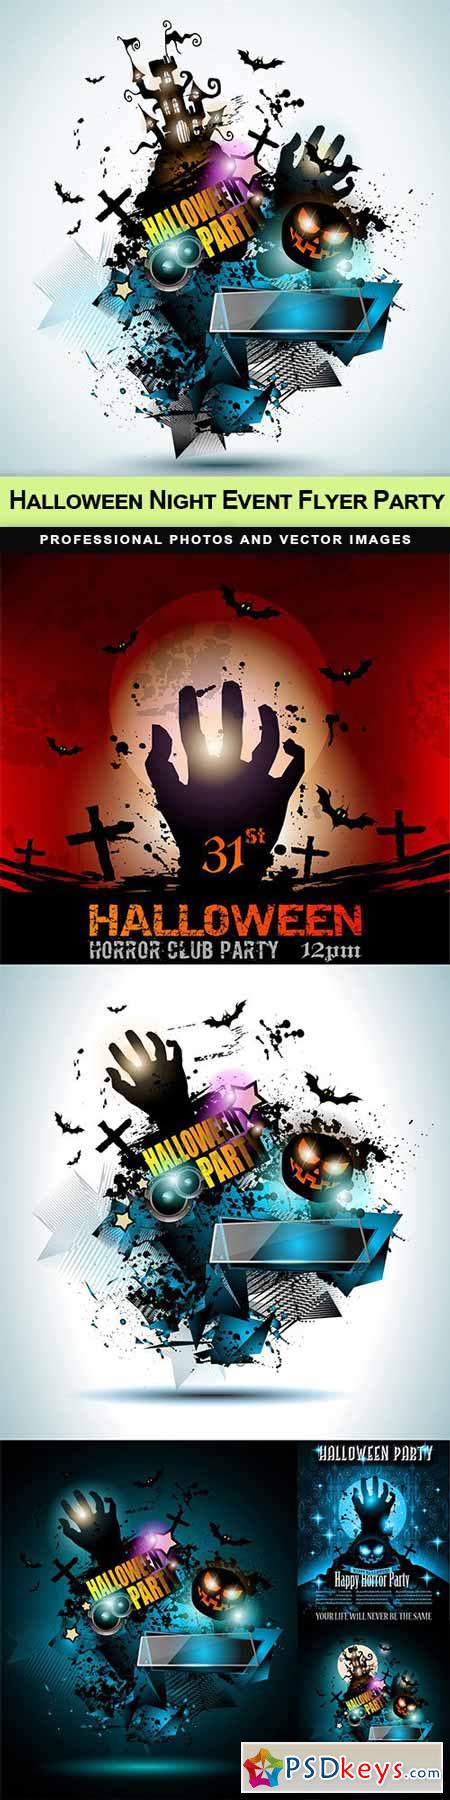 Halloween Night Event Flyer Party template - 6 EPS